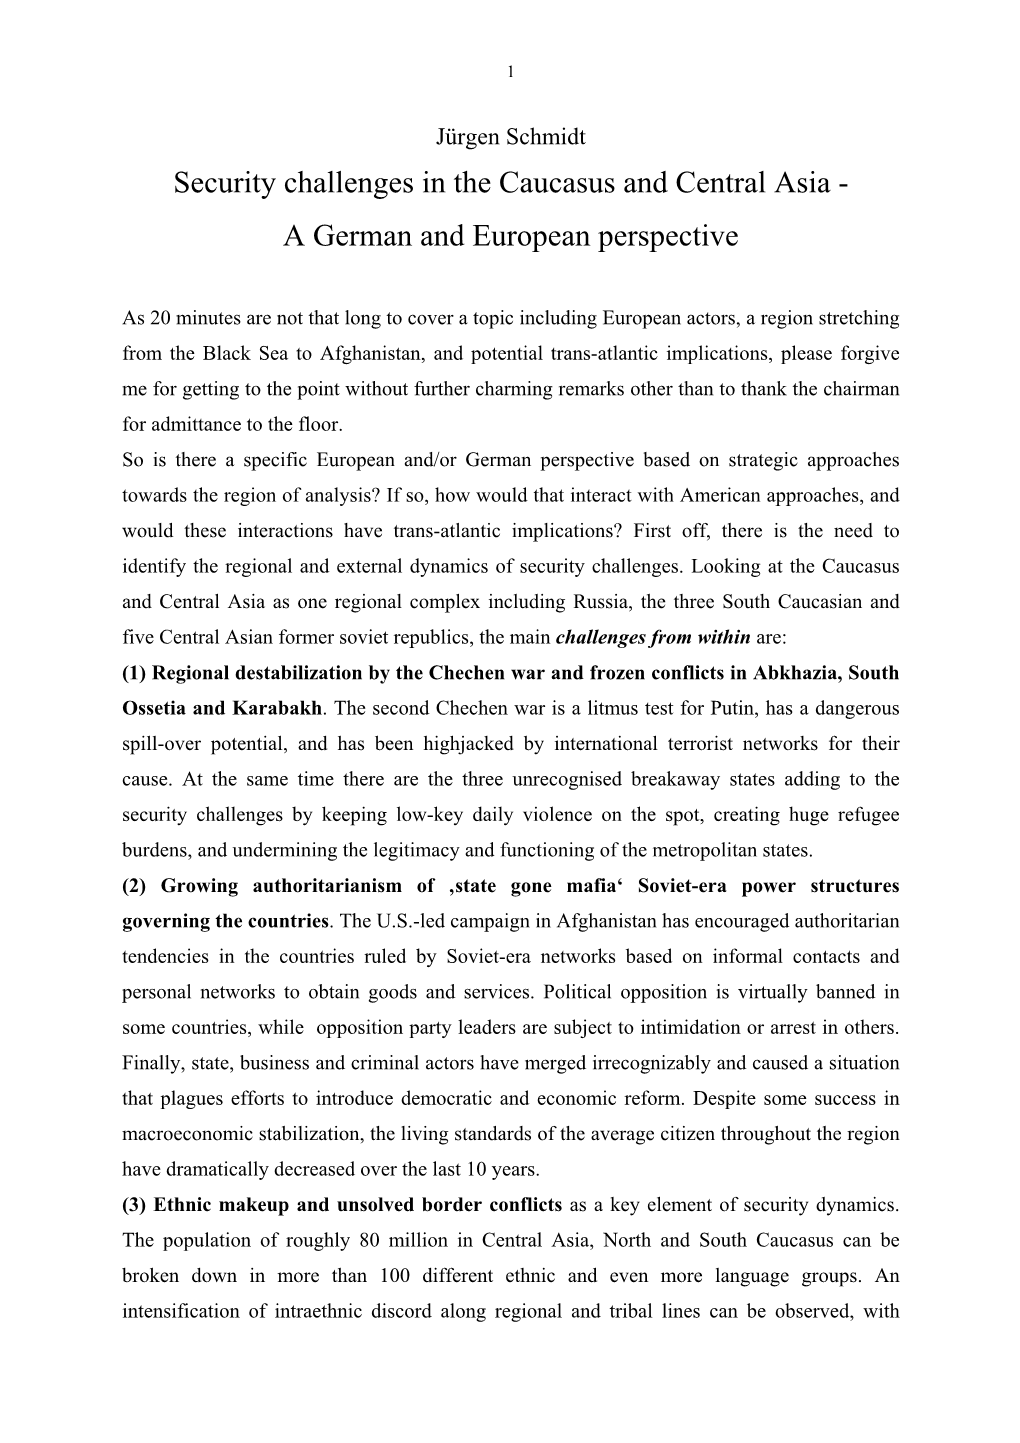 Security Challenges in the Caucasus and Central Asia - a German and European Perspective